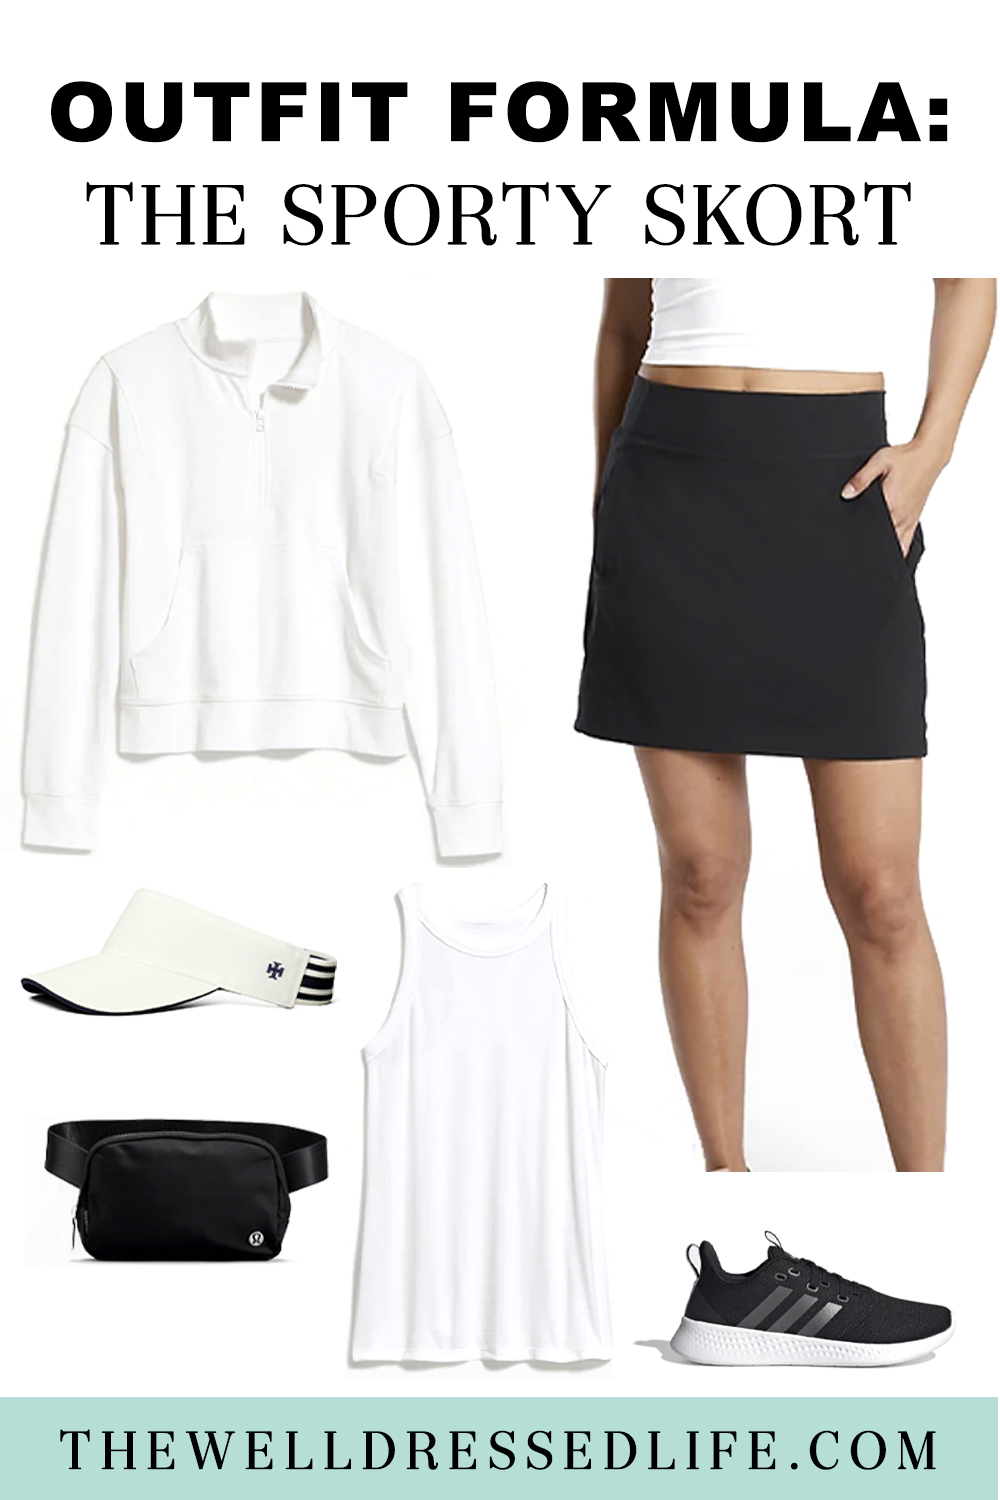 Outfit Formula #22: The Sporty Skort